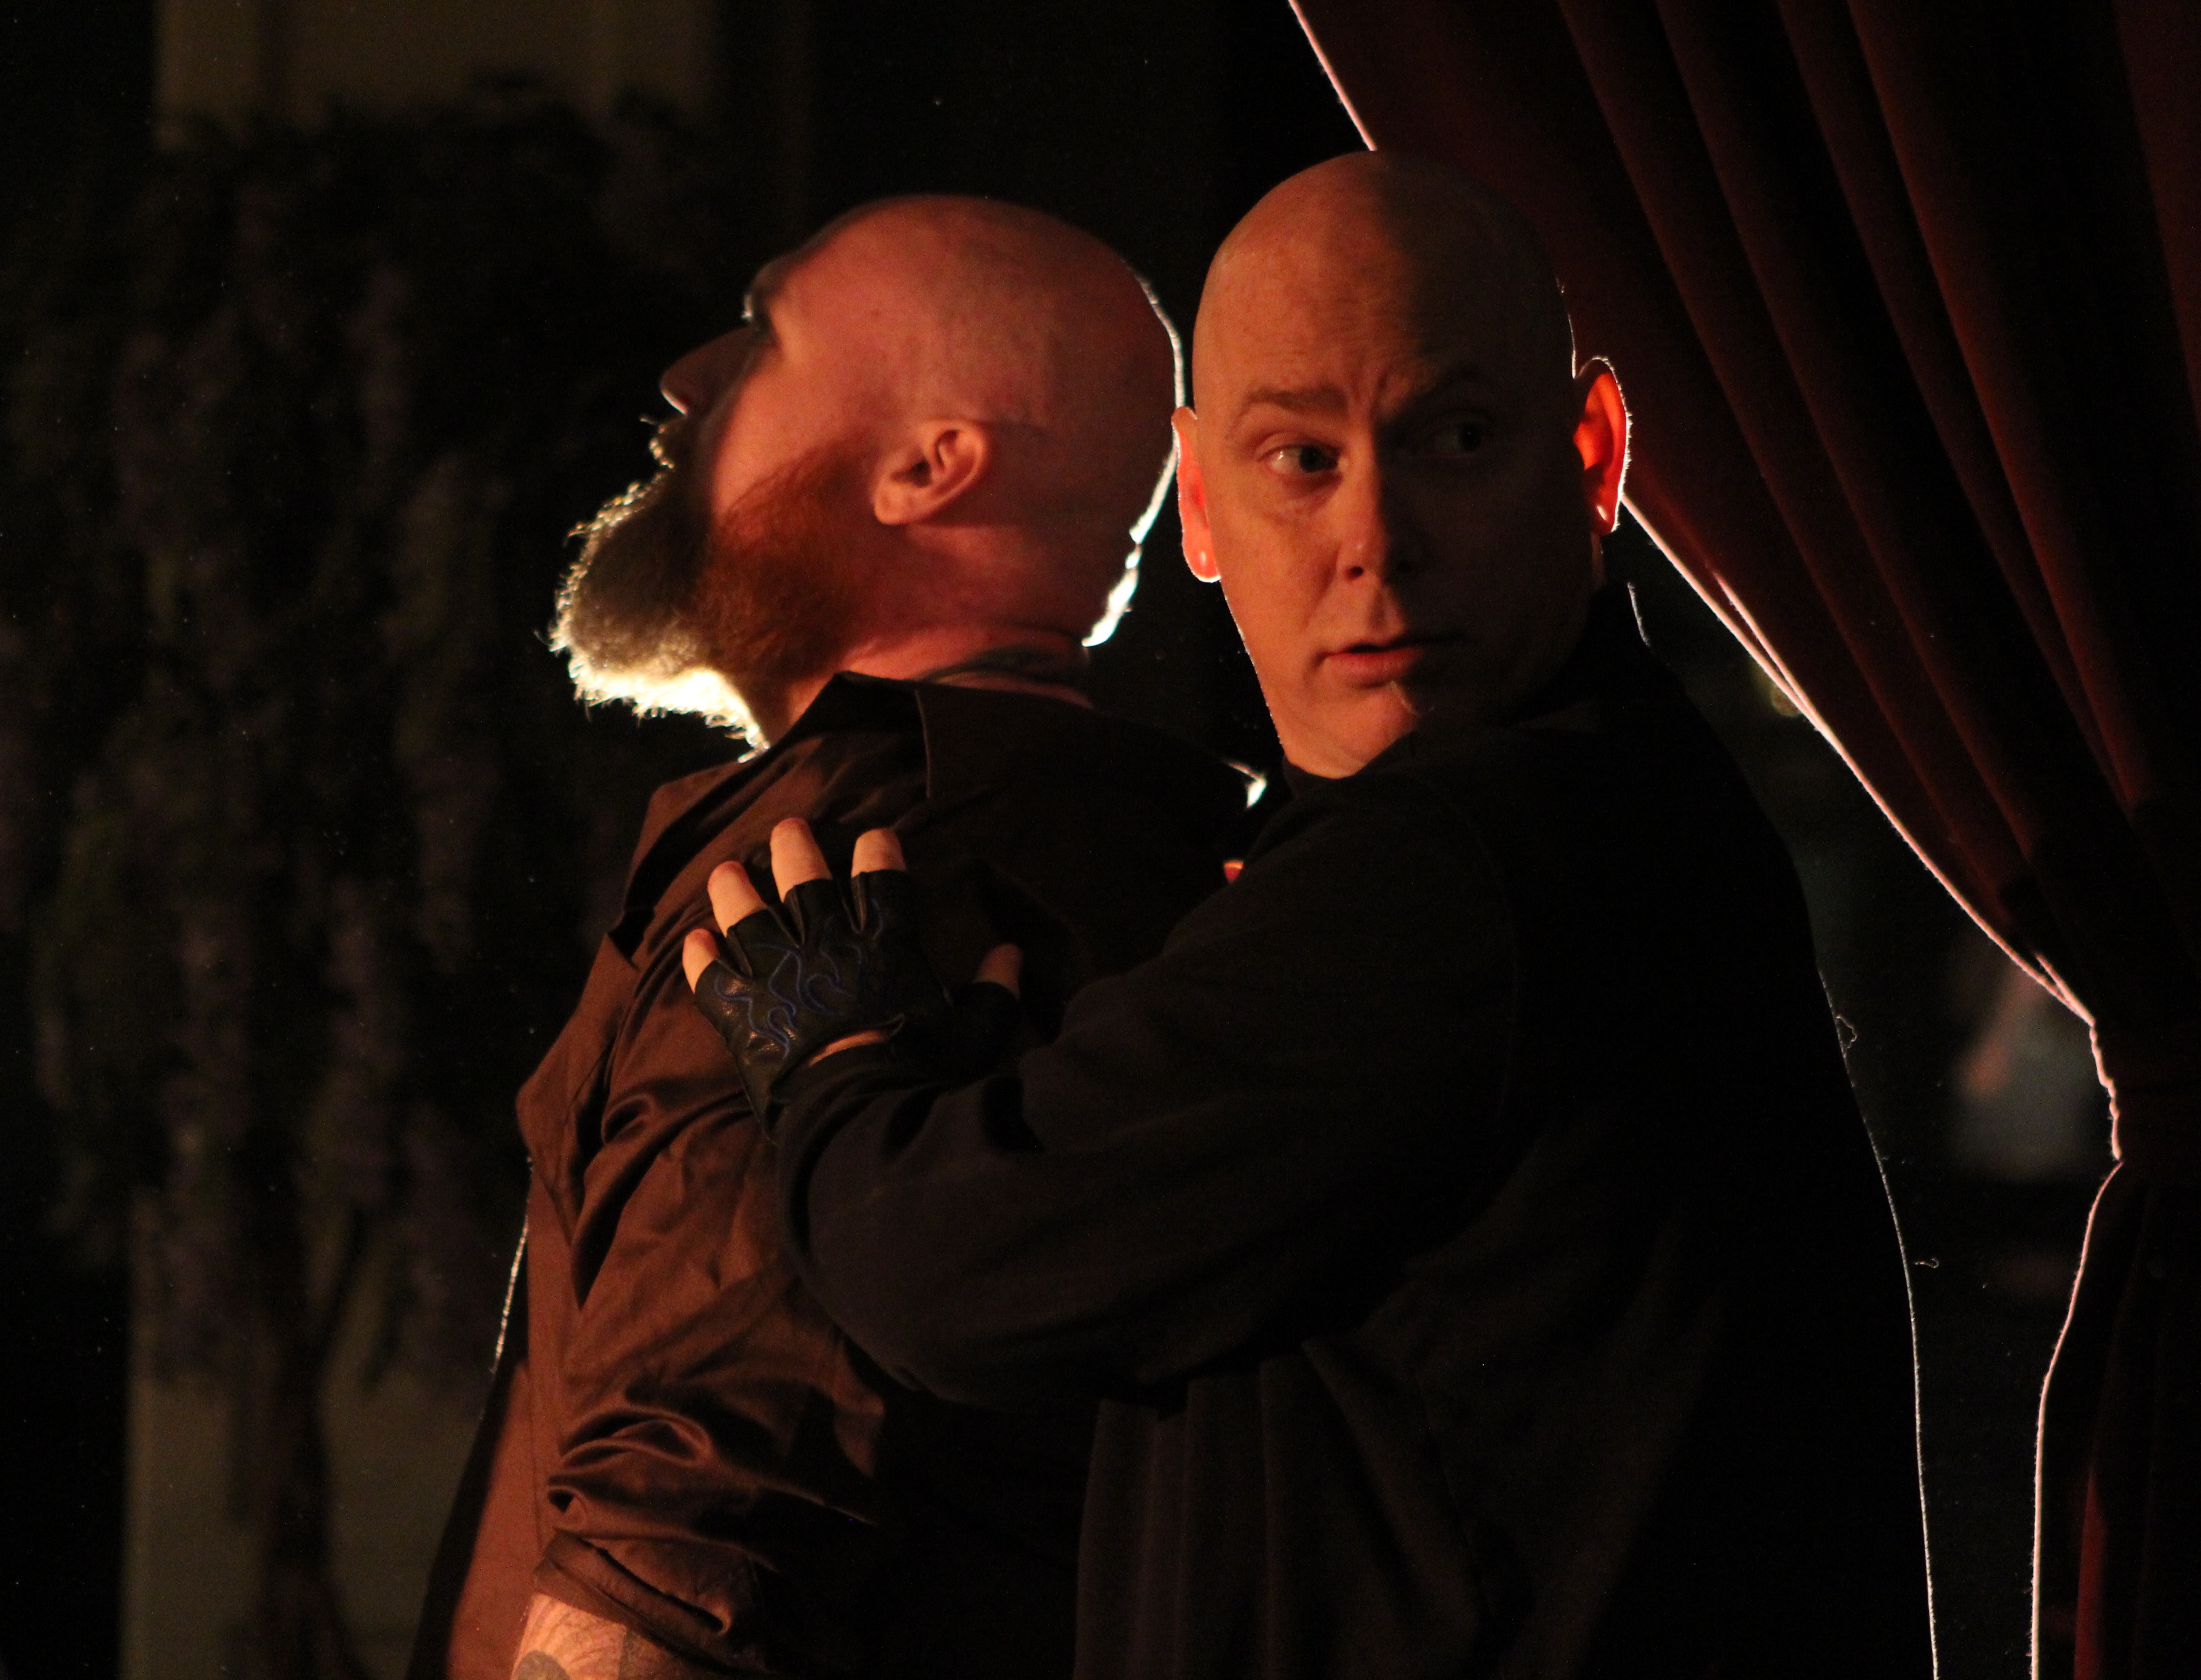 actor/stunt artists Tim Mclaws and Tim Sweeten in a pivotal action scene from the movie 